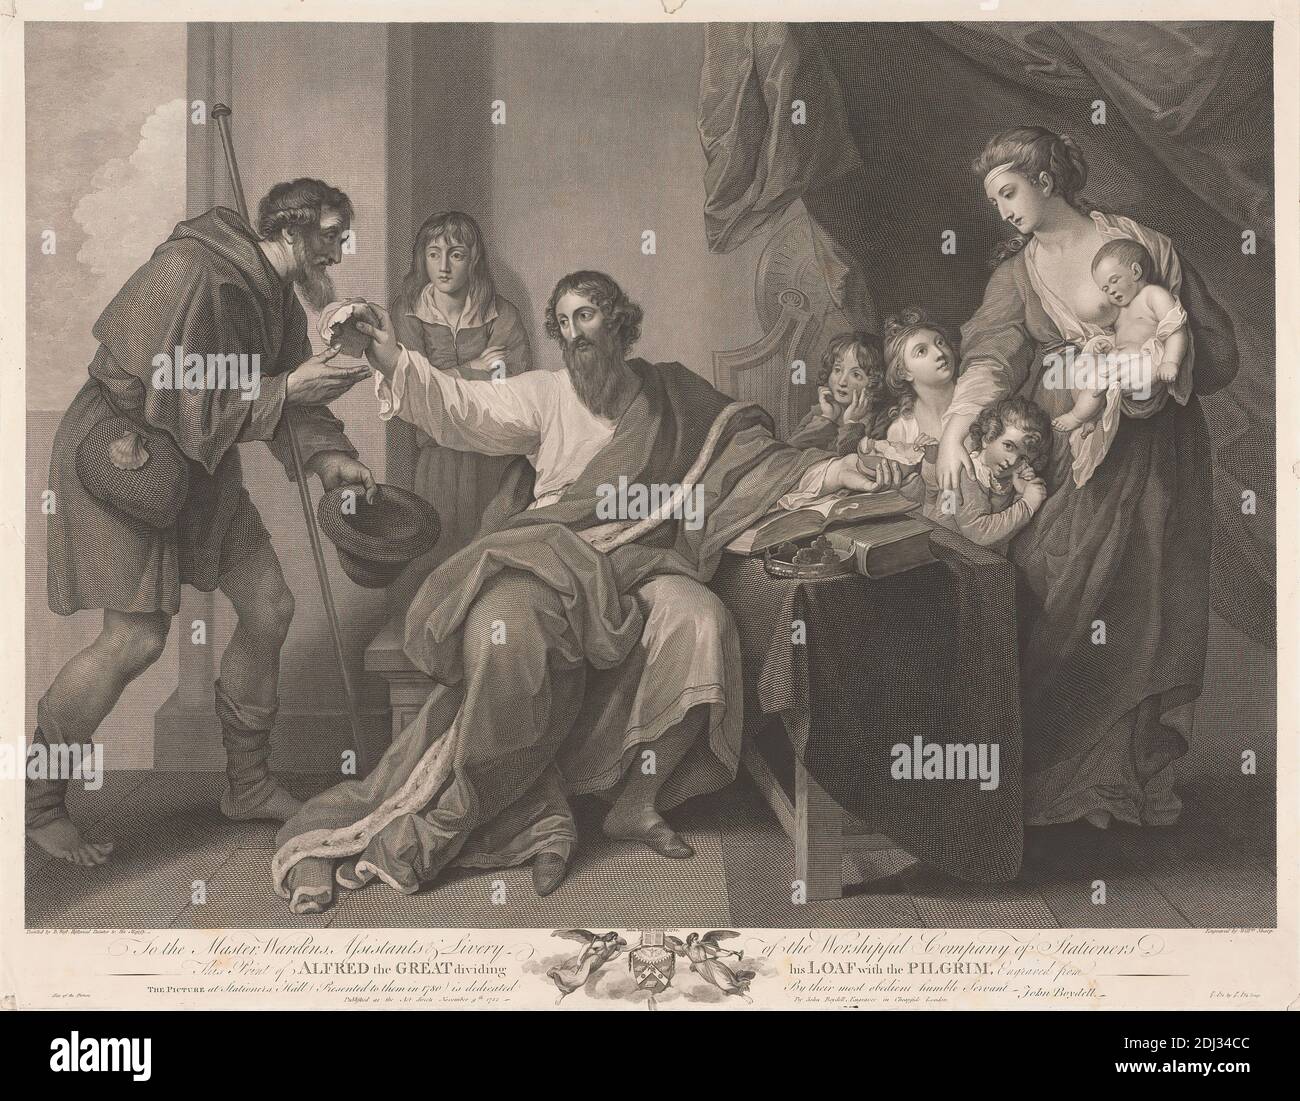 Alfred the Great Dividing His Loaf with the Pilgrim, William Sharp, 1749–1824, British, after Benjamin West, 1738–1820, American, active in Britain (from 1763), 1782, Engraving on moderately thick, slightly textured, blued white, laid paper, mounted on, thick, rough, blued white, laid paper, Mount: 22 1/16 × 30 inches (56 × 76.2 cm), Sheet: 19 1/4 × 24 11/16 inches (48.9 × 62.7 cm), and Image: 17 1/16 × 23 1/2 inches (43.3 × 59.7 cm Stock Photo